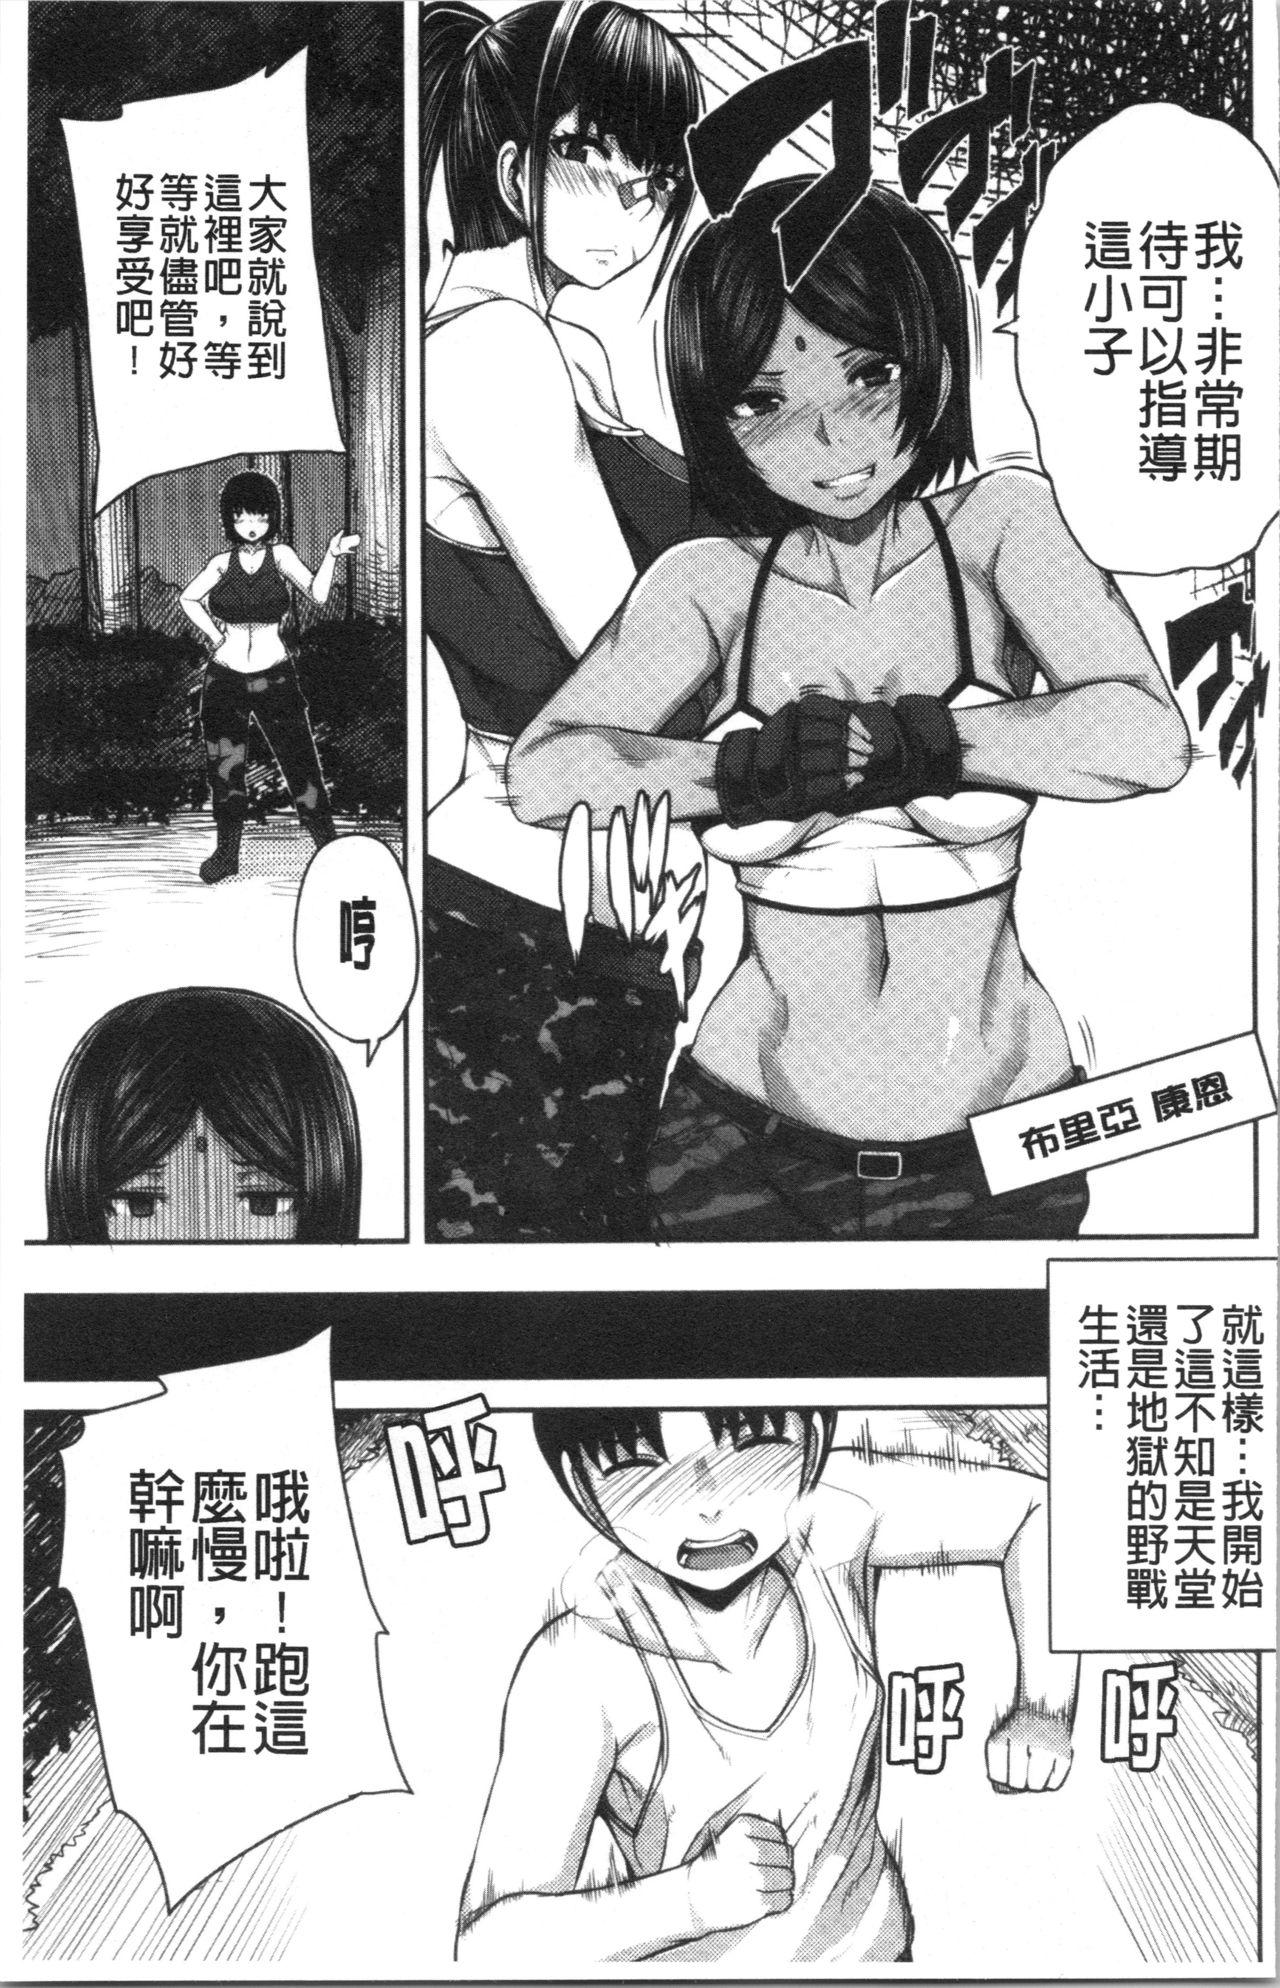 Jerk Off [Yutakame] Onee-chan BOOT CAMP ni Youkoso! - Sister’s Boot Camp [Chinese] Lolicon - Page 11